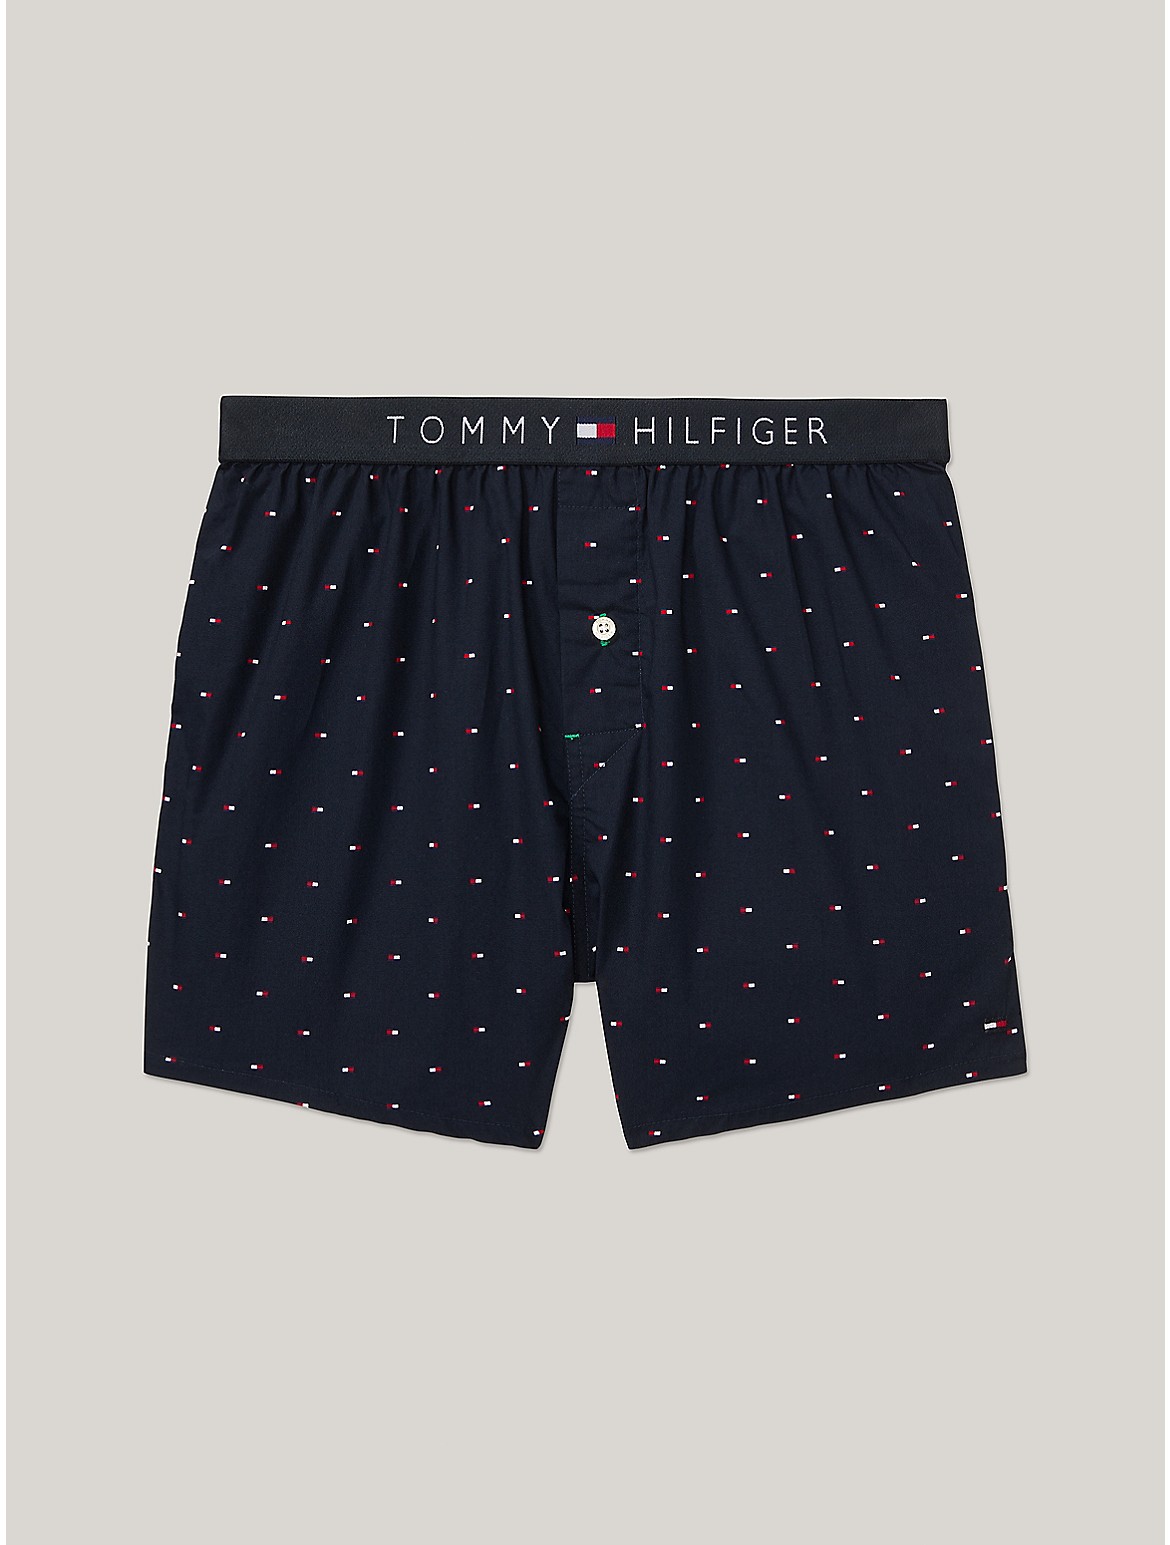 Shop Tommy Hilfiger Slim Fit Fashion Woven Boxer In Sailor Navy